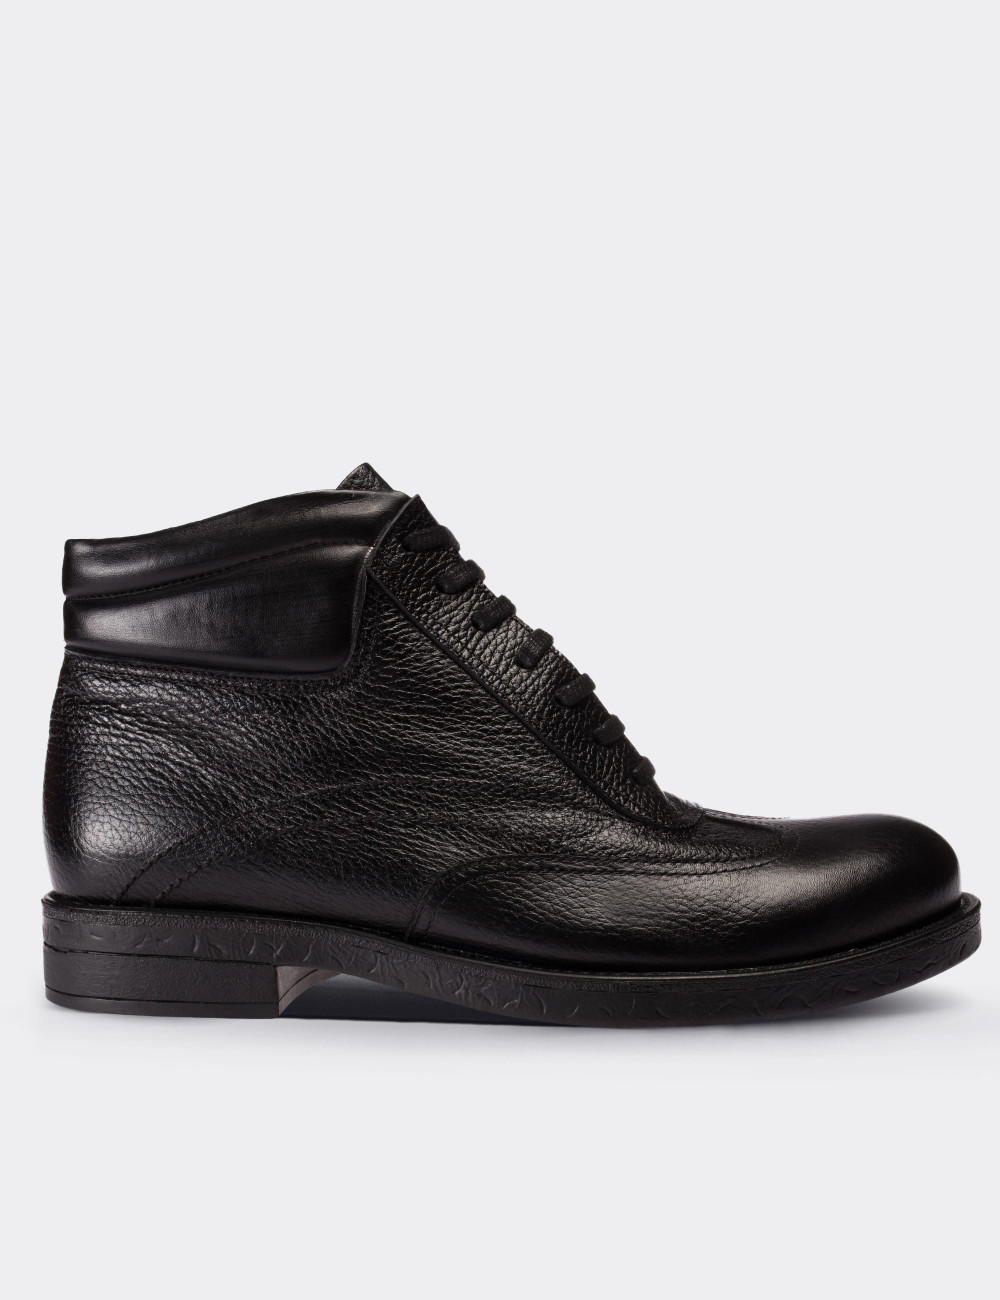 Black  Leather  Boots - 01759MSYHC01